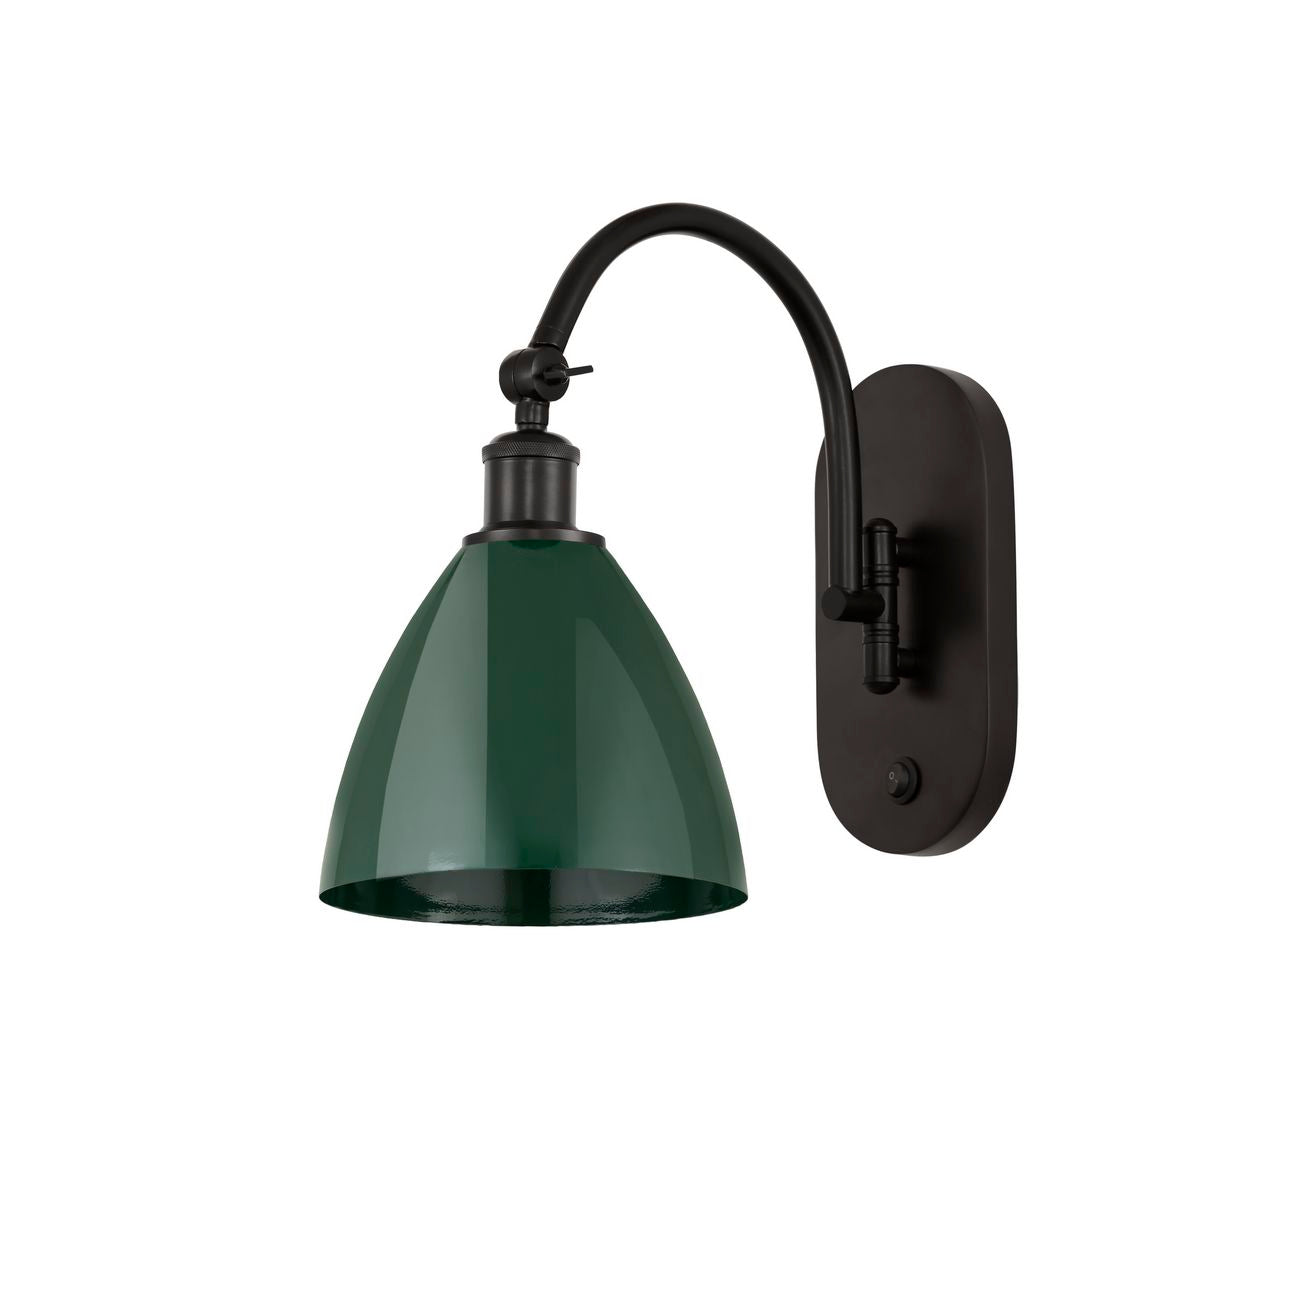 518-1W-OB-MBD-75-GR 1-Light 7.5" Oil Rubbed Bronze Sconce - Green Plymouth Dome Shade - LED Bulb - Dimmensions: 7.5 x 13.75 x 13.25 - Glass Up or Down: Yes